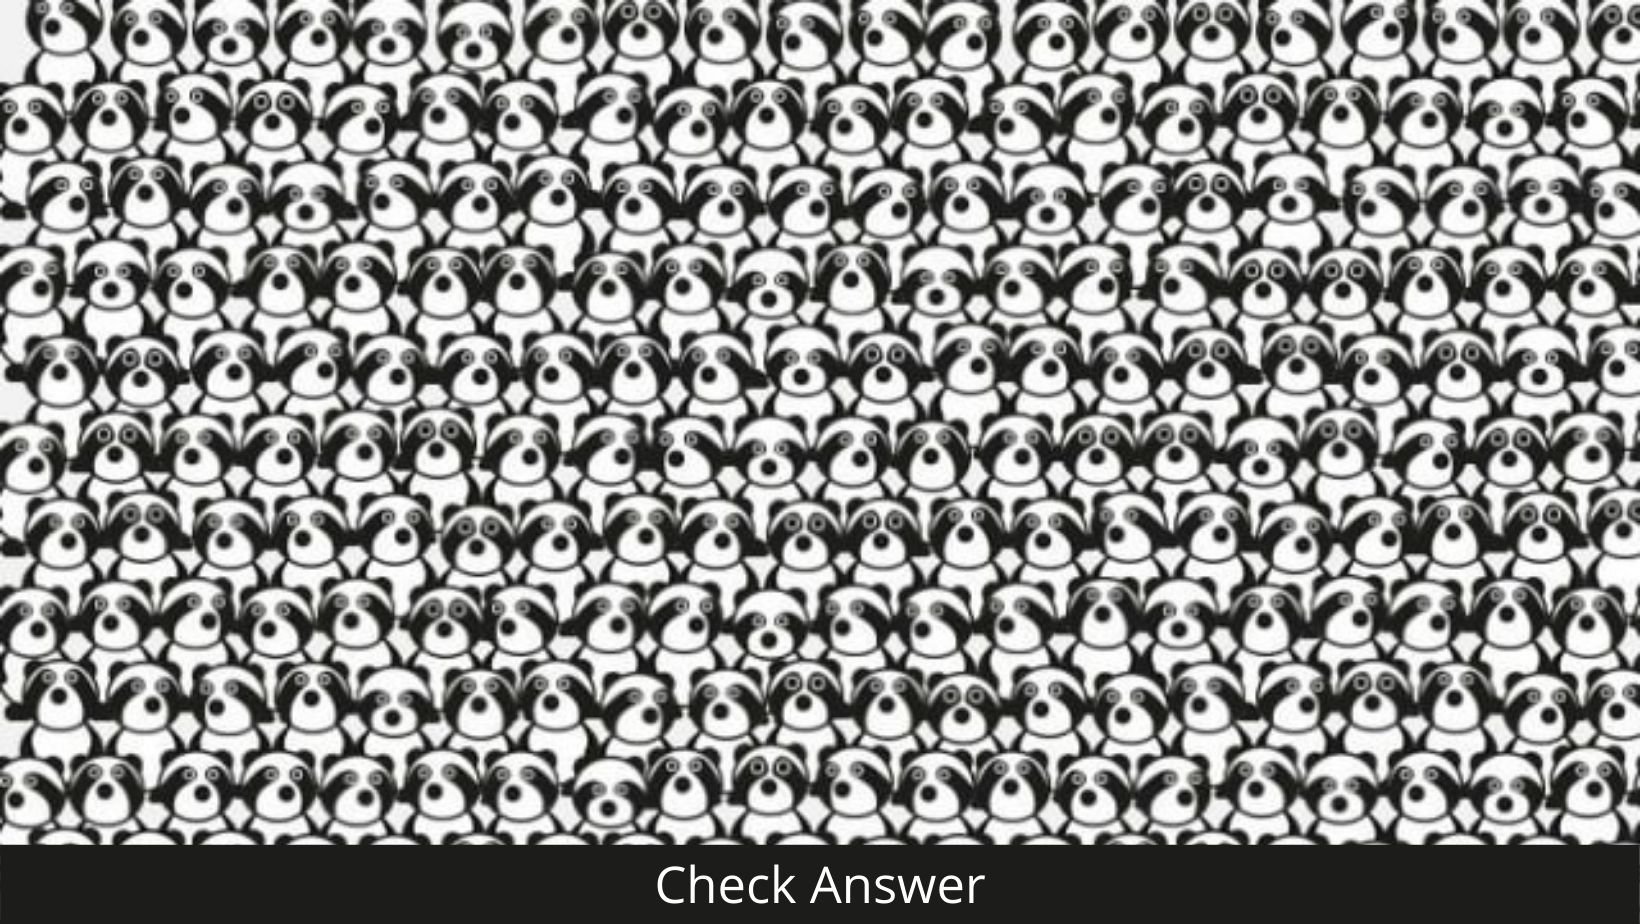 small joys thumbnail 6.jpg?resize=1200,630 - There's A Panda Hiding In These Adorable Raccoons! Can You SPOT It?